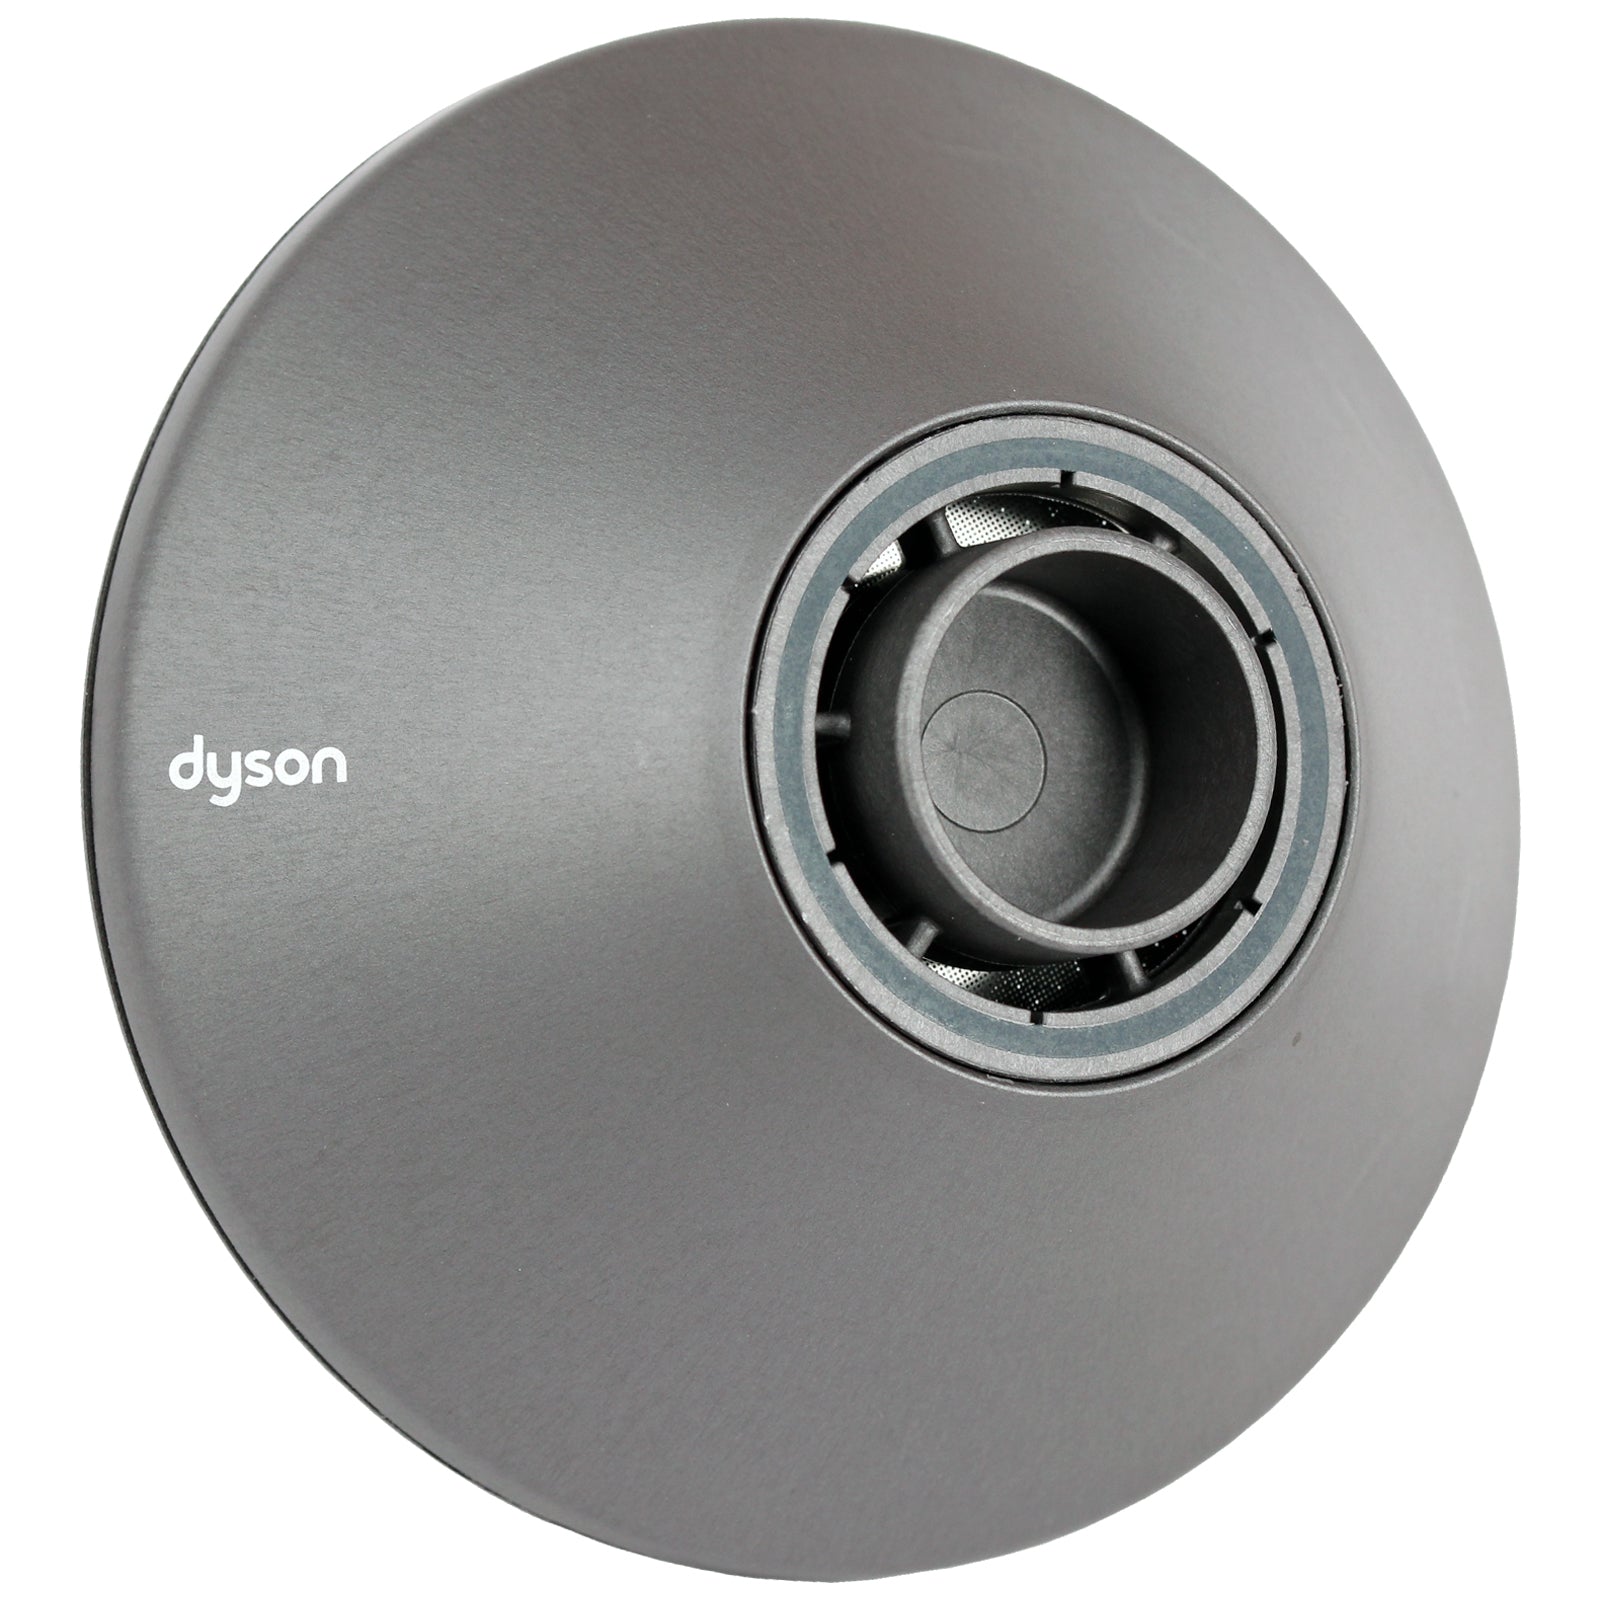 DYSON Supersonic™ Hair Dryer Re-Engineered Diffuser One-Click (Iron Grey)